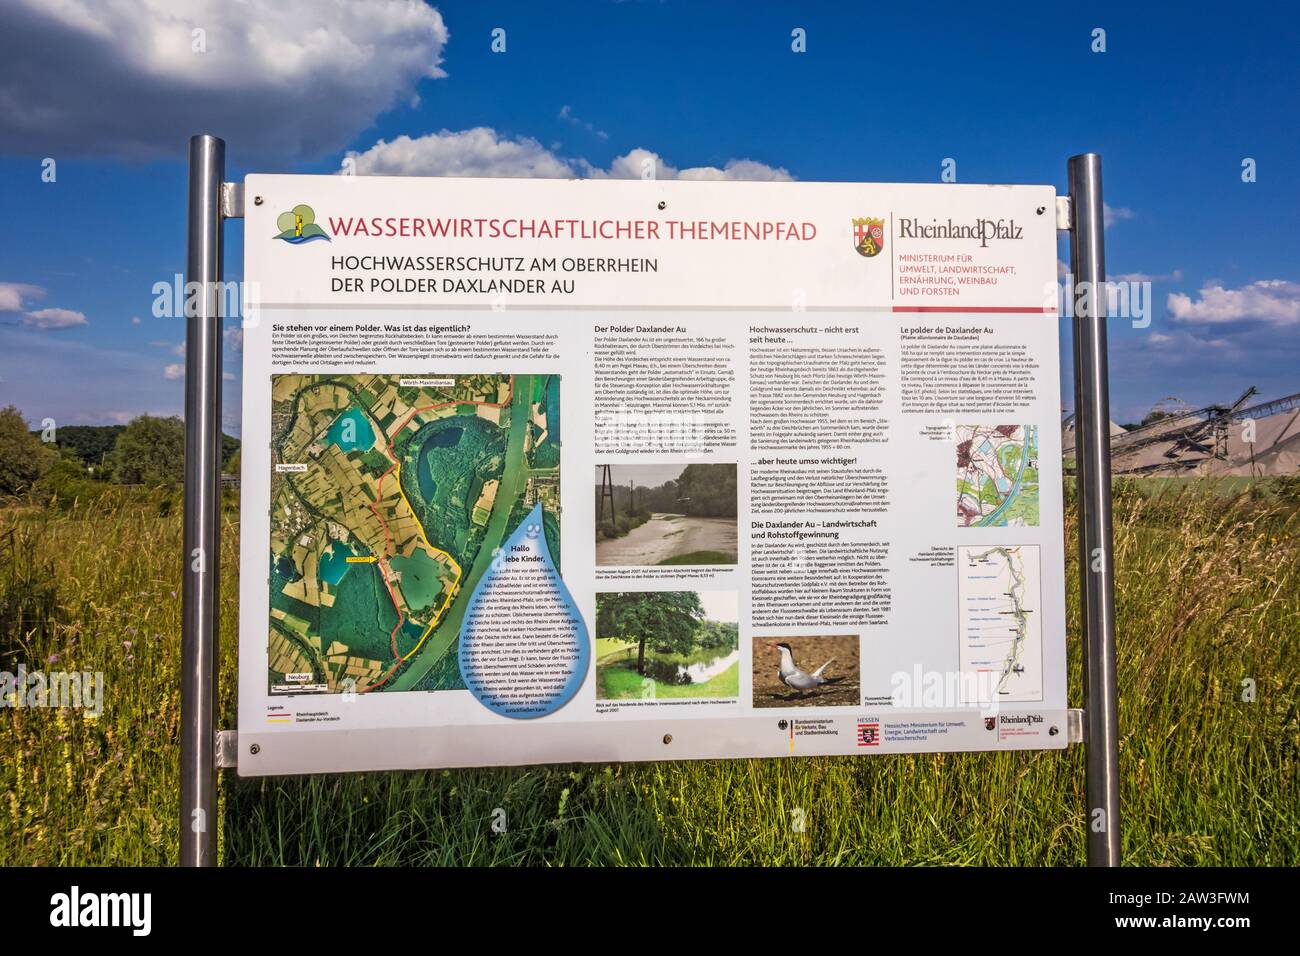 Hagenbach, Germany - May 31, 2014: Flood defence information sign of environment department of Rhineland-Palatinate - polder Daxlander Au protects the Stock Photo